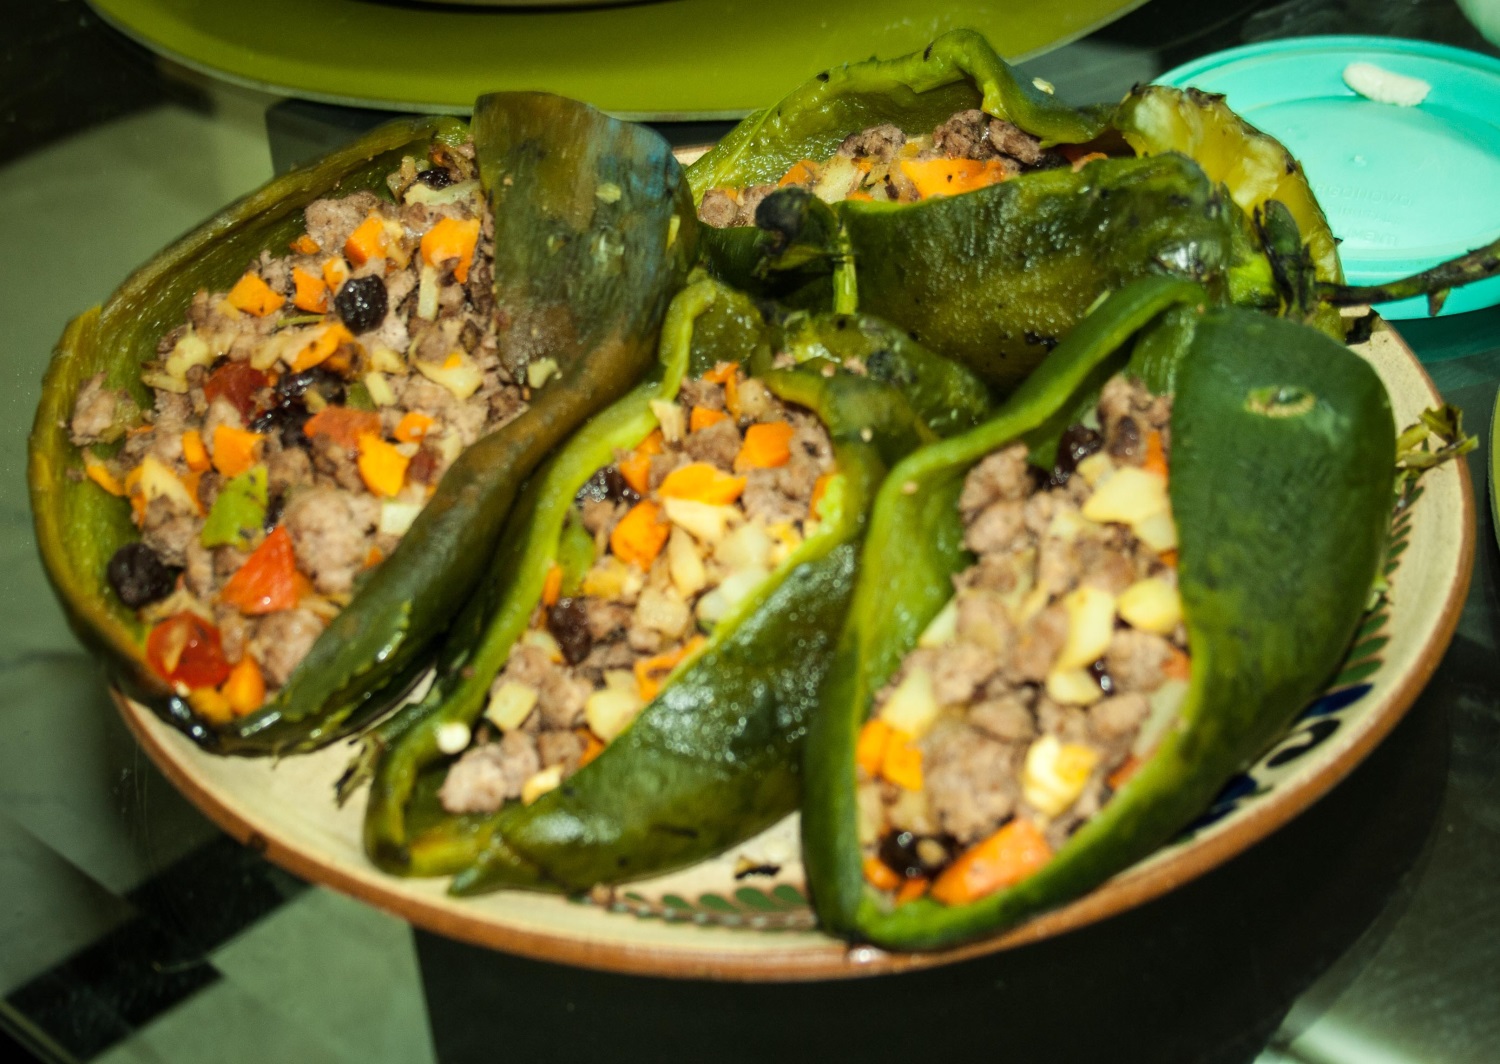 : Chiles en Nogadas, grilled chile poblanos stuffed with minced beef, carrots and raisins, potatoes then topped with a walnut cream sauce.